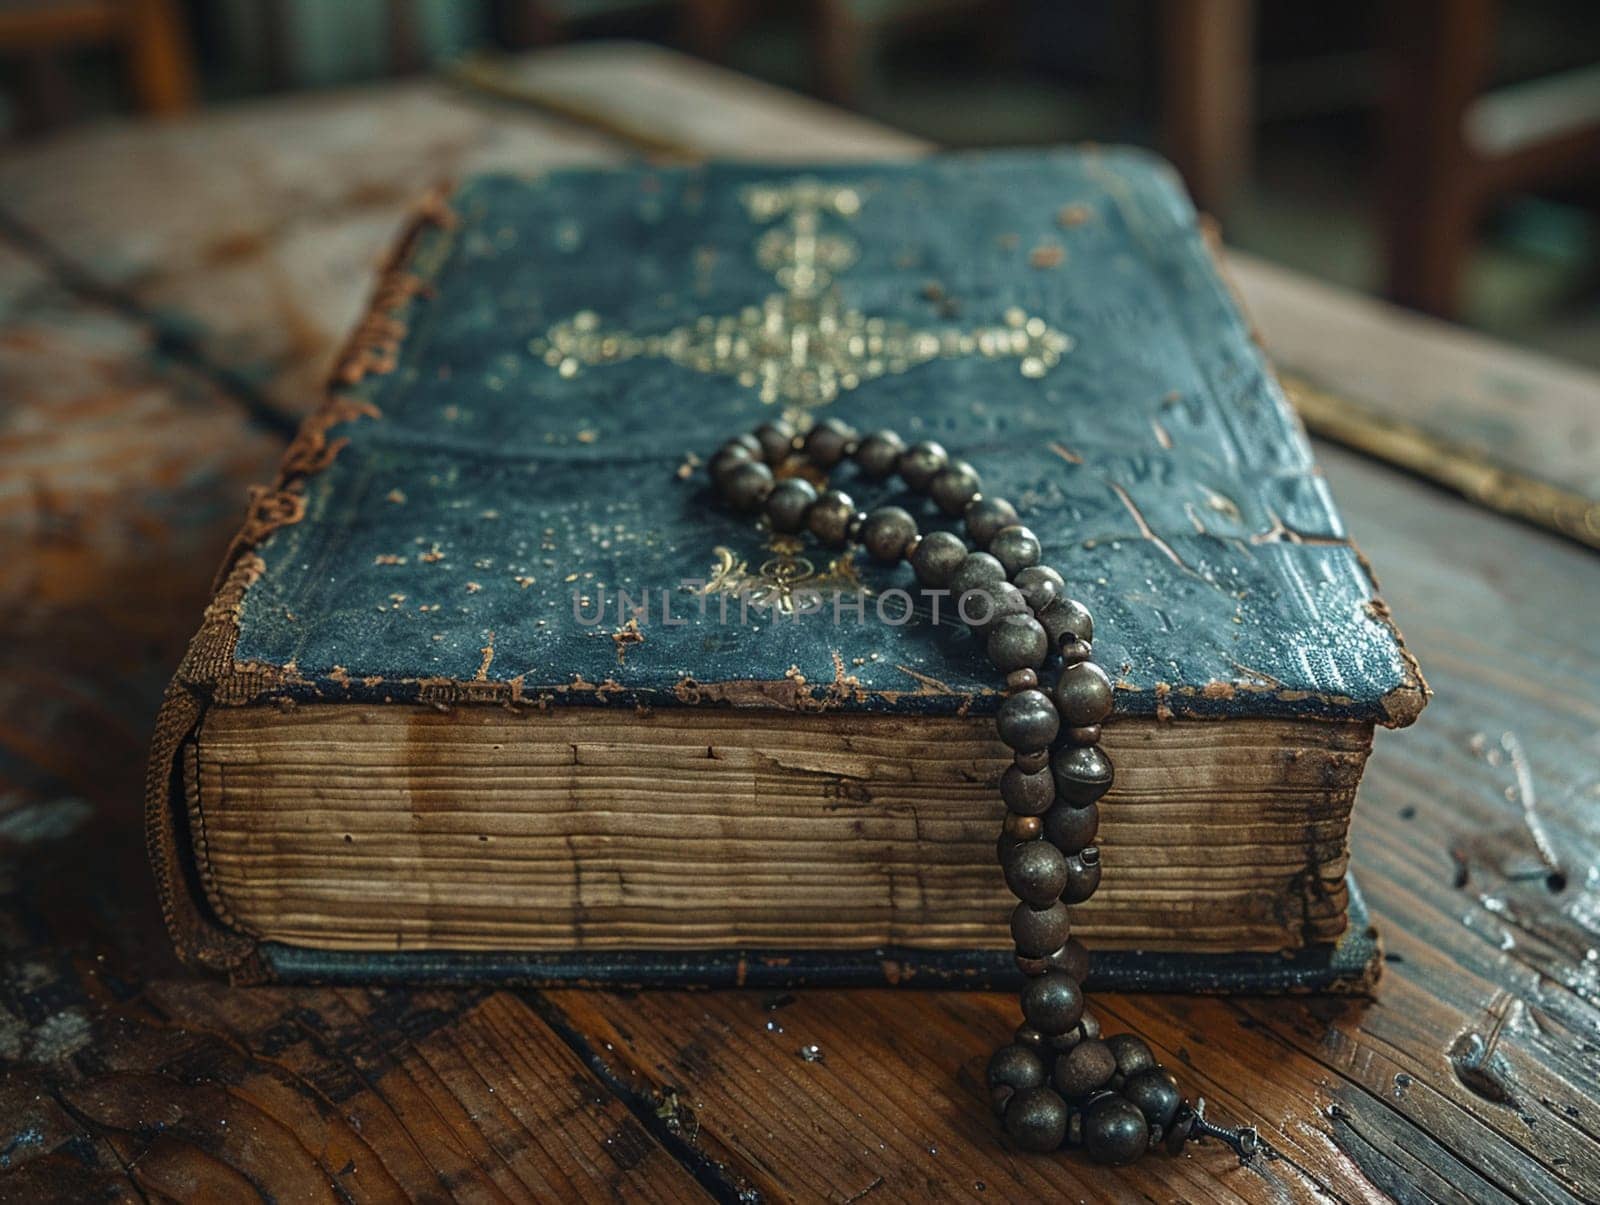 Rosary Beads Draped Over a Weathered Prayer Book, The beads and text blur together, a Catholic emblem of prayer and reflection.